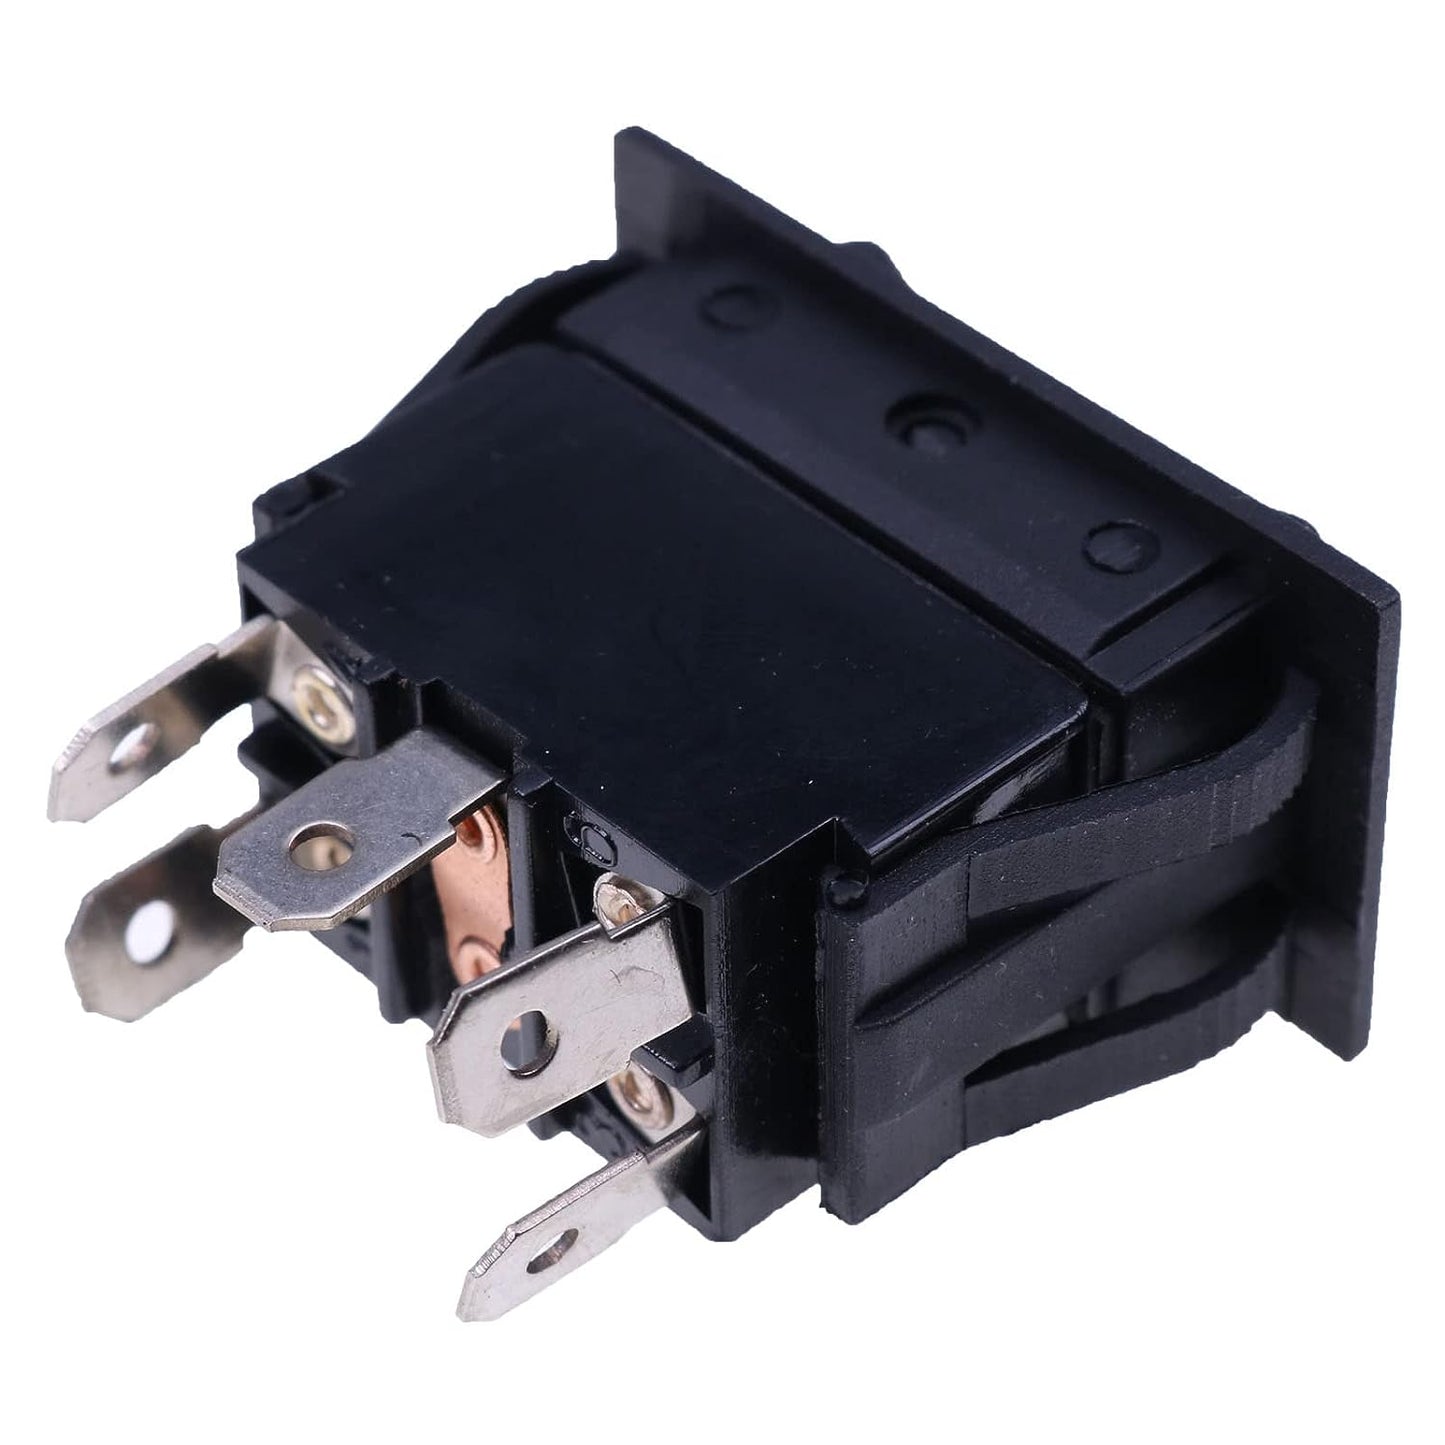 6665410 Headlight Switch Compatible With Bobcat Loaders 751 753 763 773 863 864 873